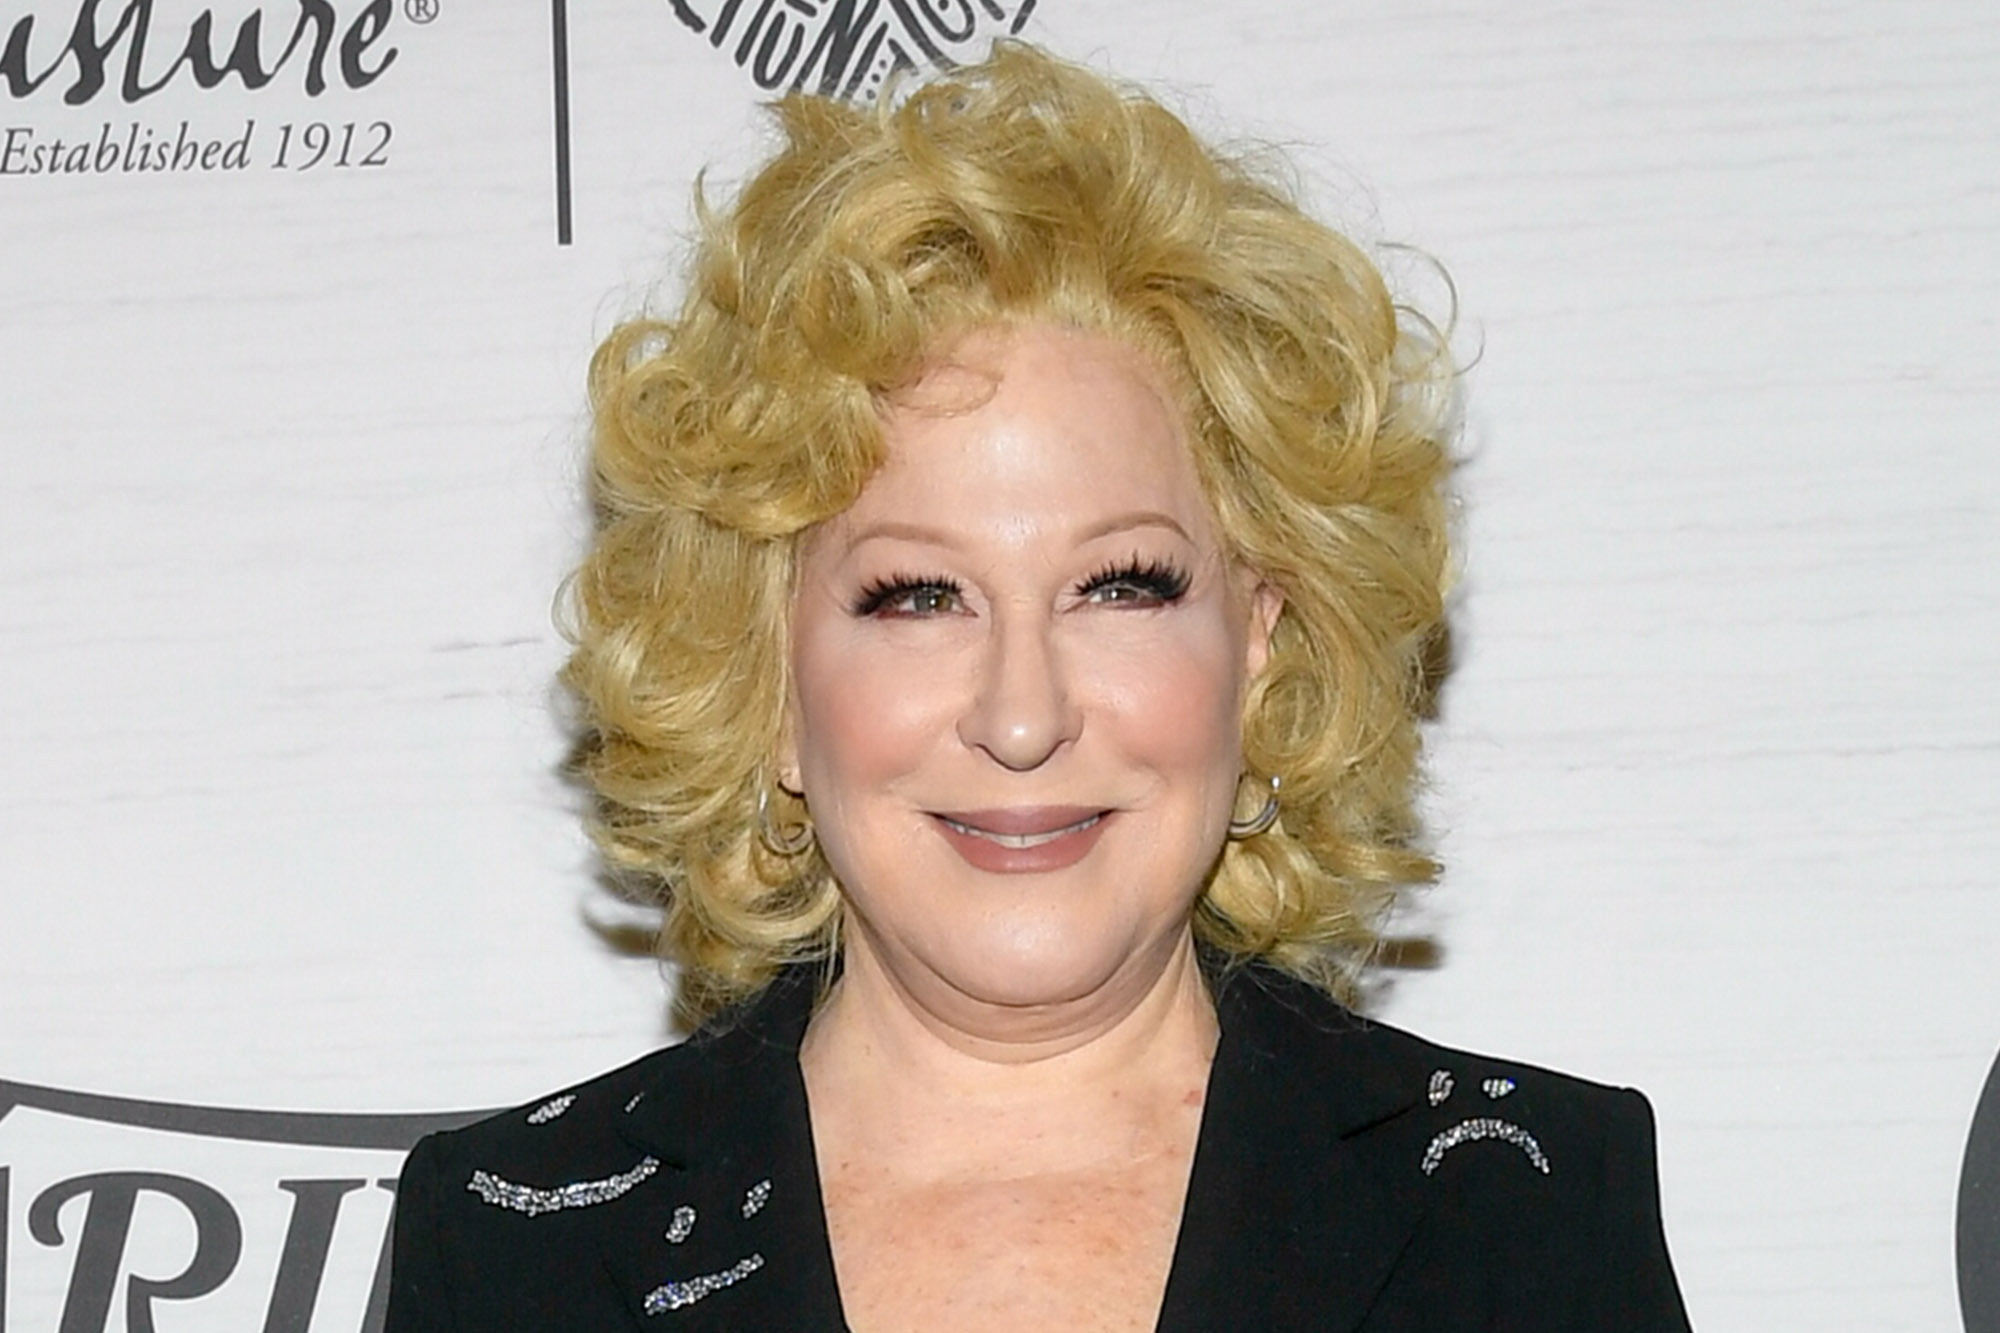 Bette Midler, Offensive remark, West Virginia comment, Social media controversy, 2000x1340 HD Desktop